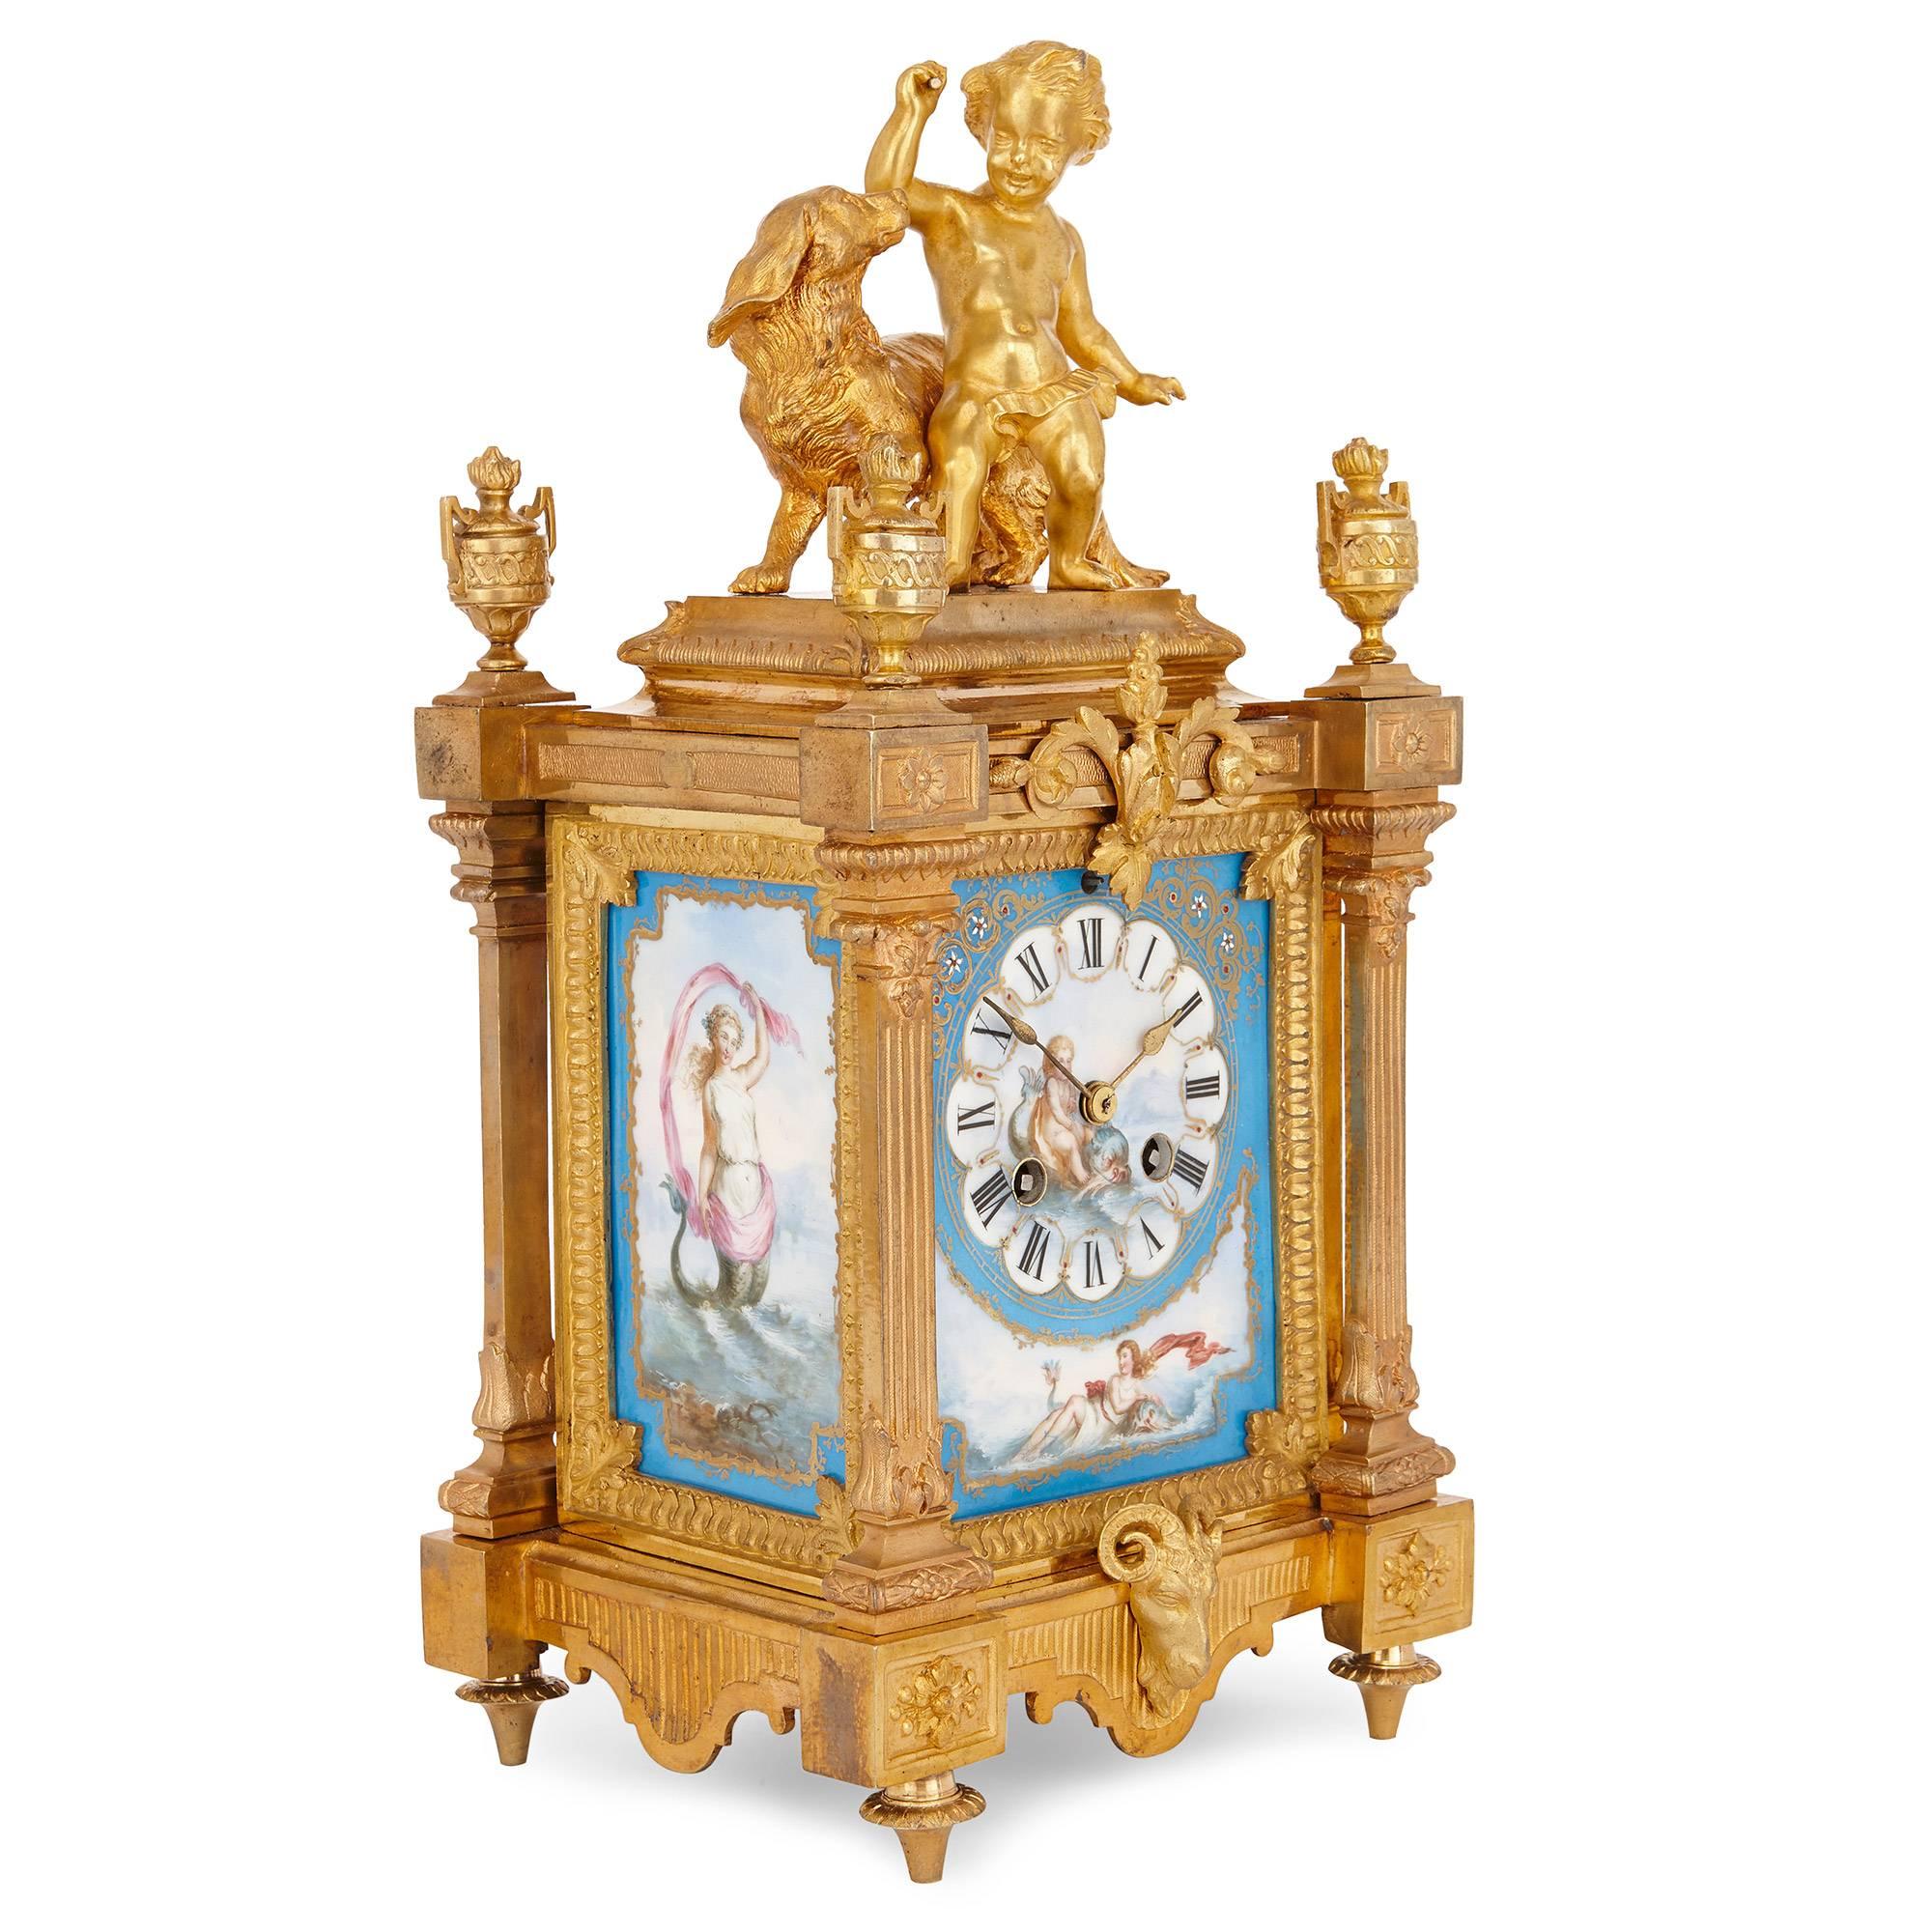 This splendid neoclassical style French mantel clock is beautifully crafted in ormolu and porcelain decorated in the Sevres style. 'ER', the mark of French clockmaker Ernest Royer, active in the later 19th Century, is stamped on the underside of the